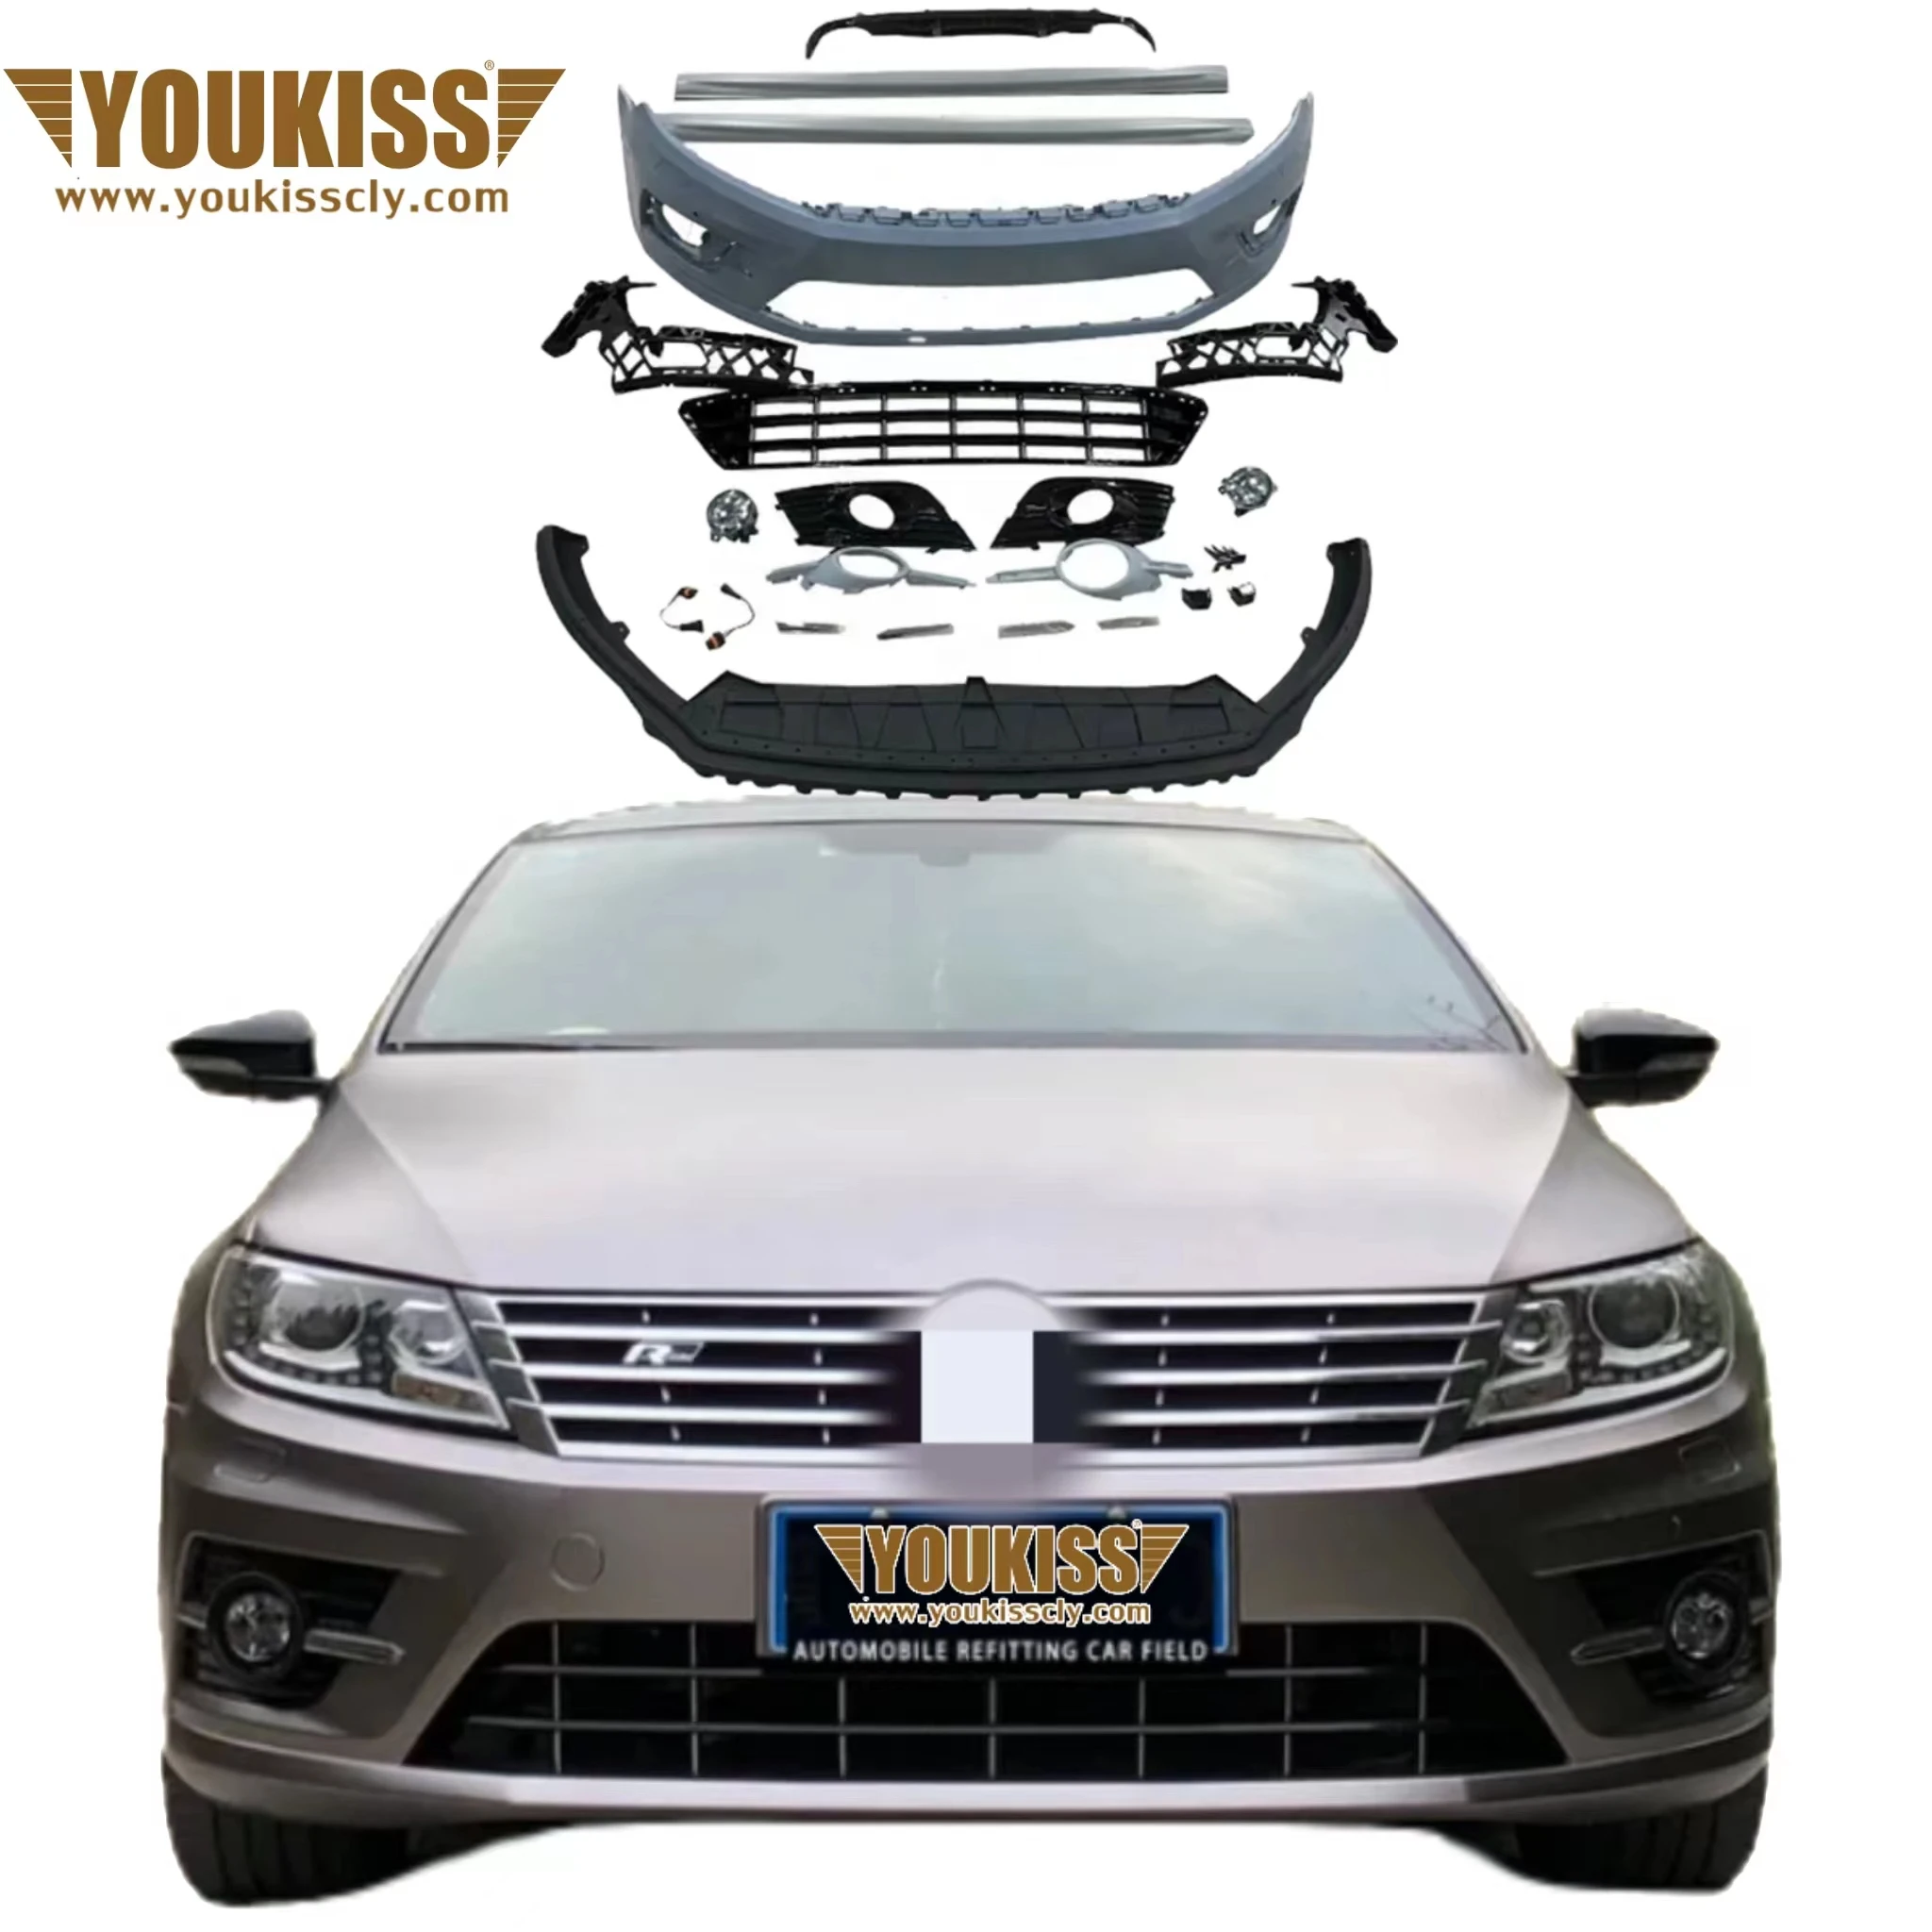 

UKISS Brand Hot Selling High Quality car part For Volkswagens CC change to R-line pp material high guality body kit bumpers